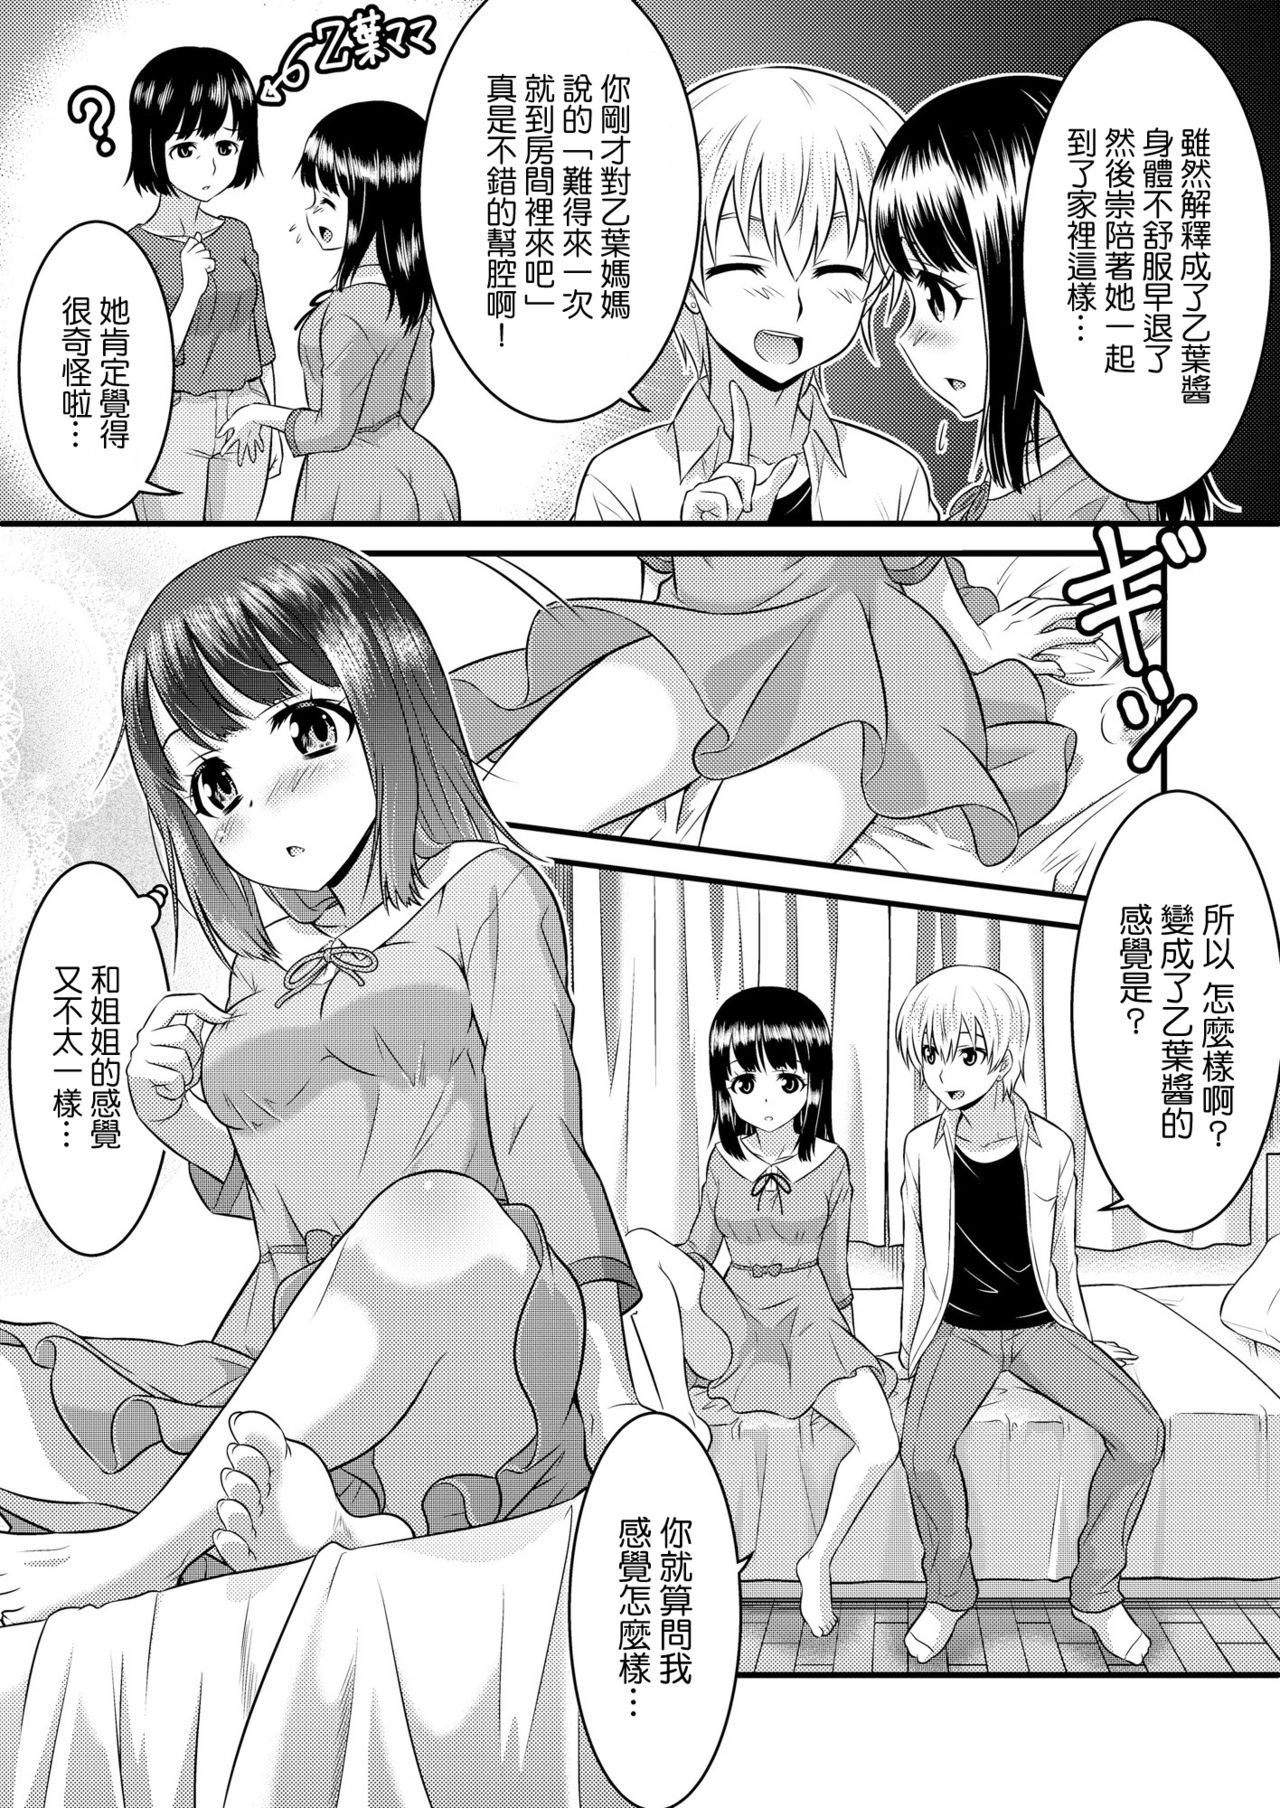 Metamorph ★ Coordination - I Become Whatever Girl I Crossdress As~ [Sister Arc, Classmate Arc] [Chinese] [瑞树汉化组] page 27 full